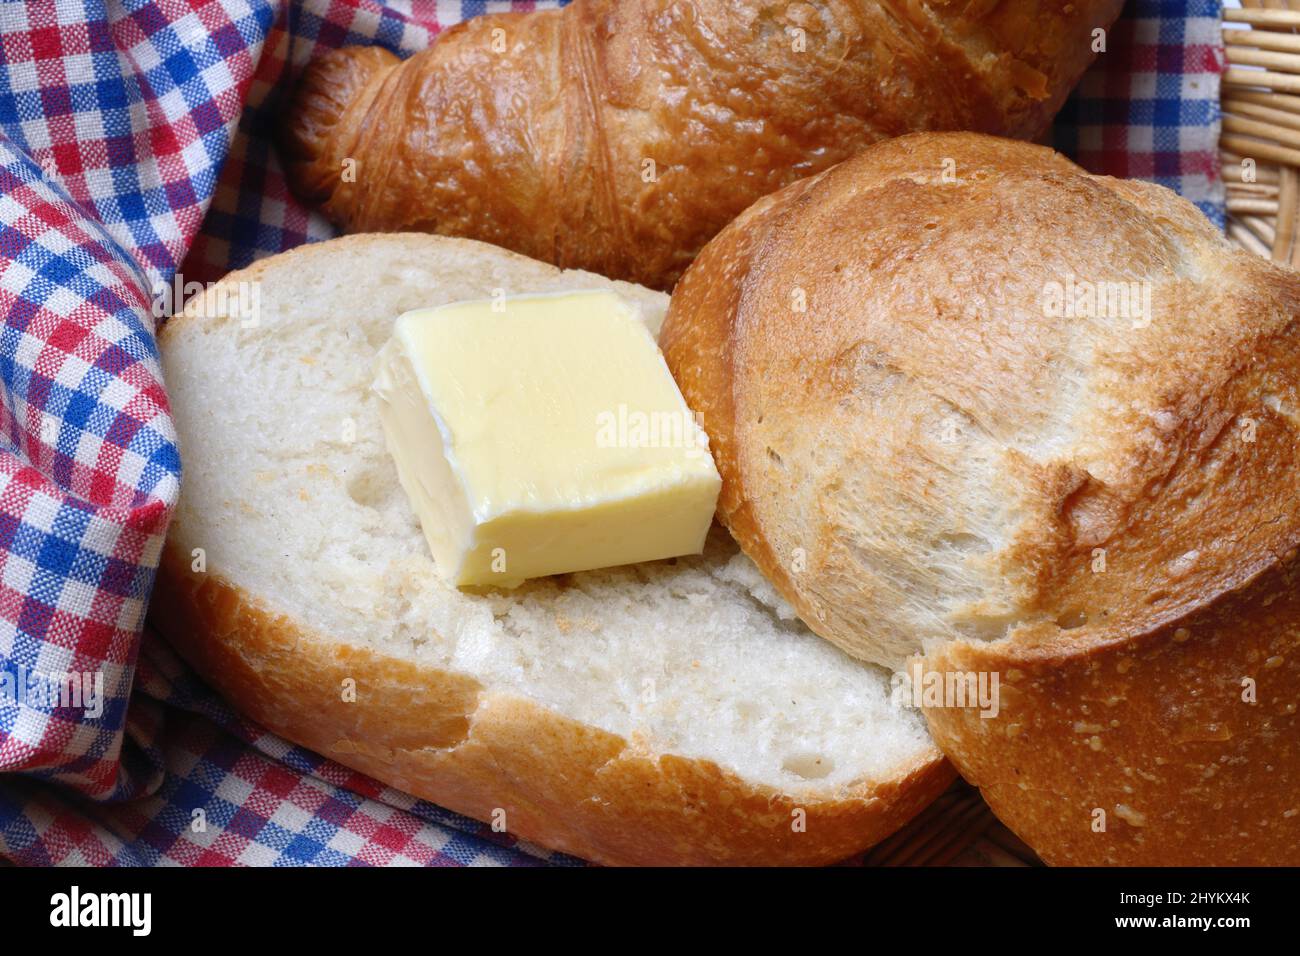 A piece of butter on a roll, bread topping Stock Photo